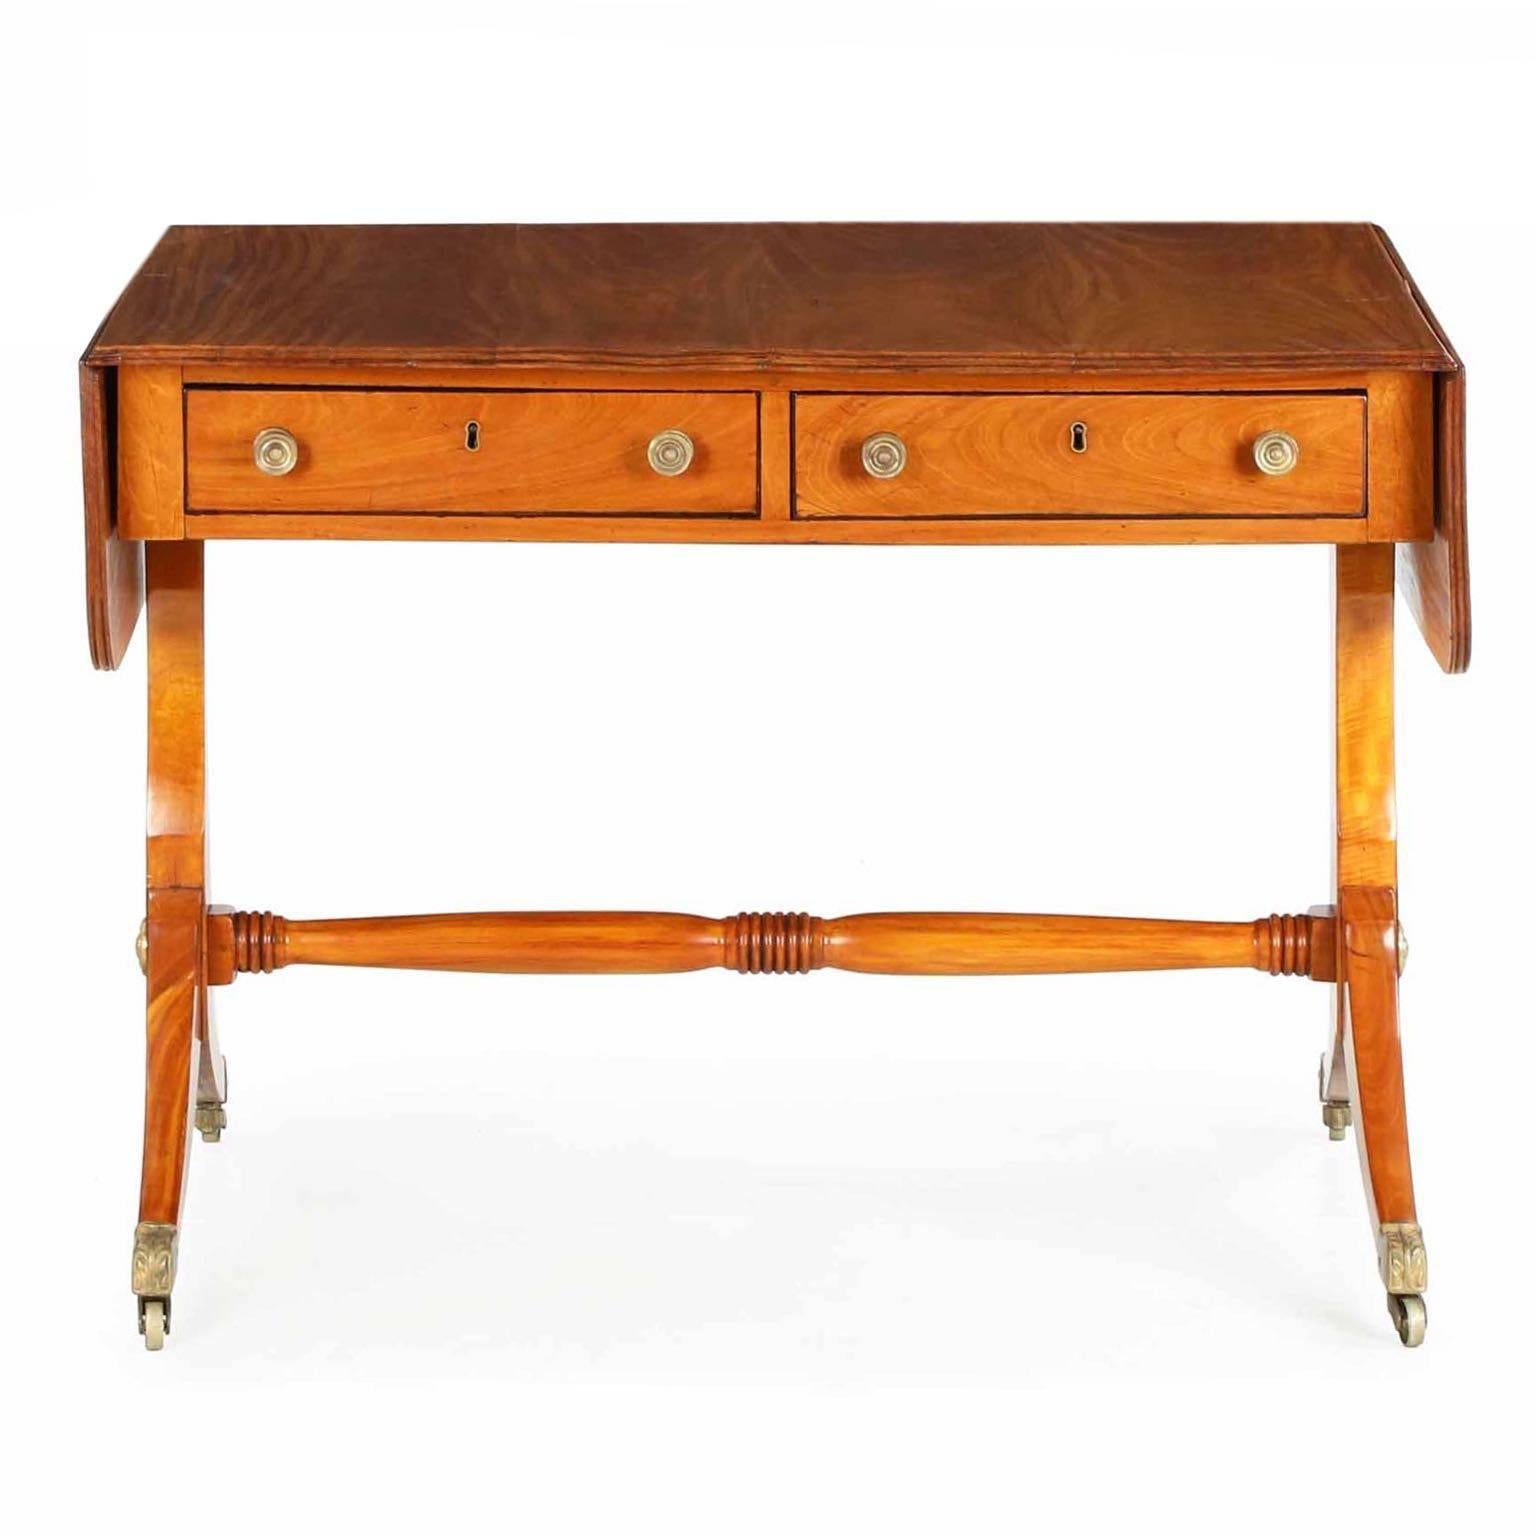 Refined and elegant in every way, this superb Regency sofa table is crafted with the coveted, hard to acquire and expensive satinwood. Most often used in stringer inlay and in veneers due to the sheer cost of the unusual plank, the majority of